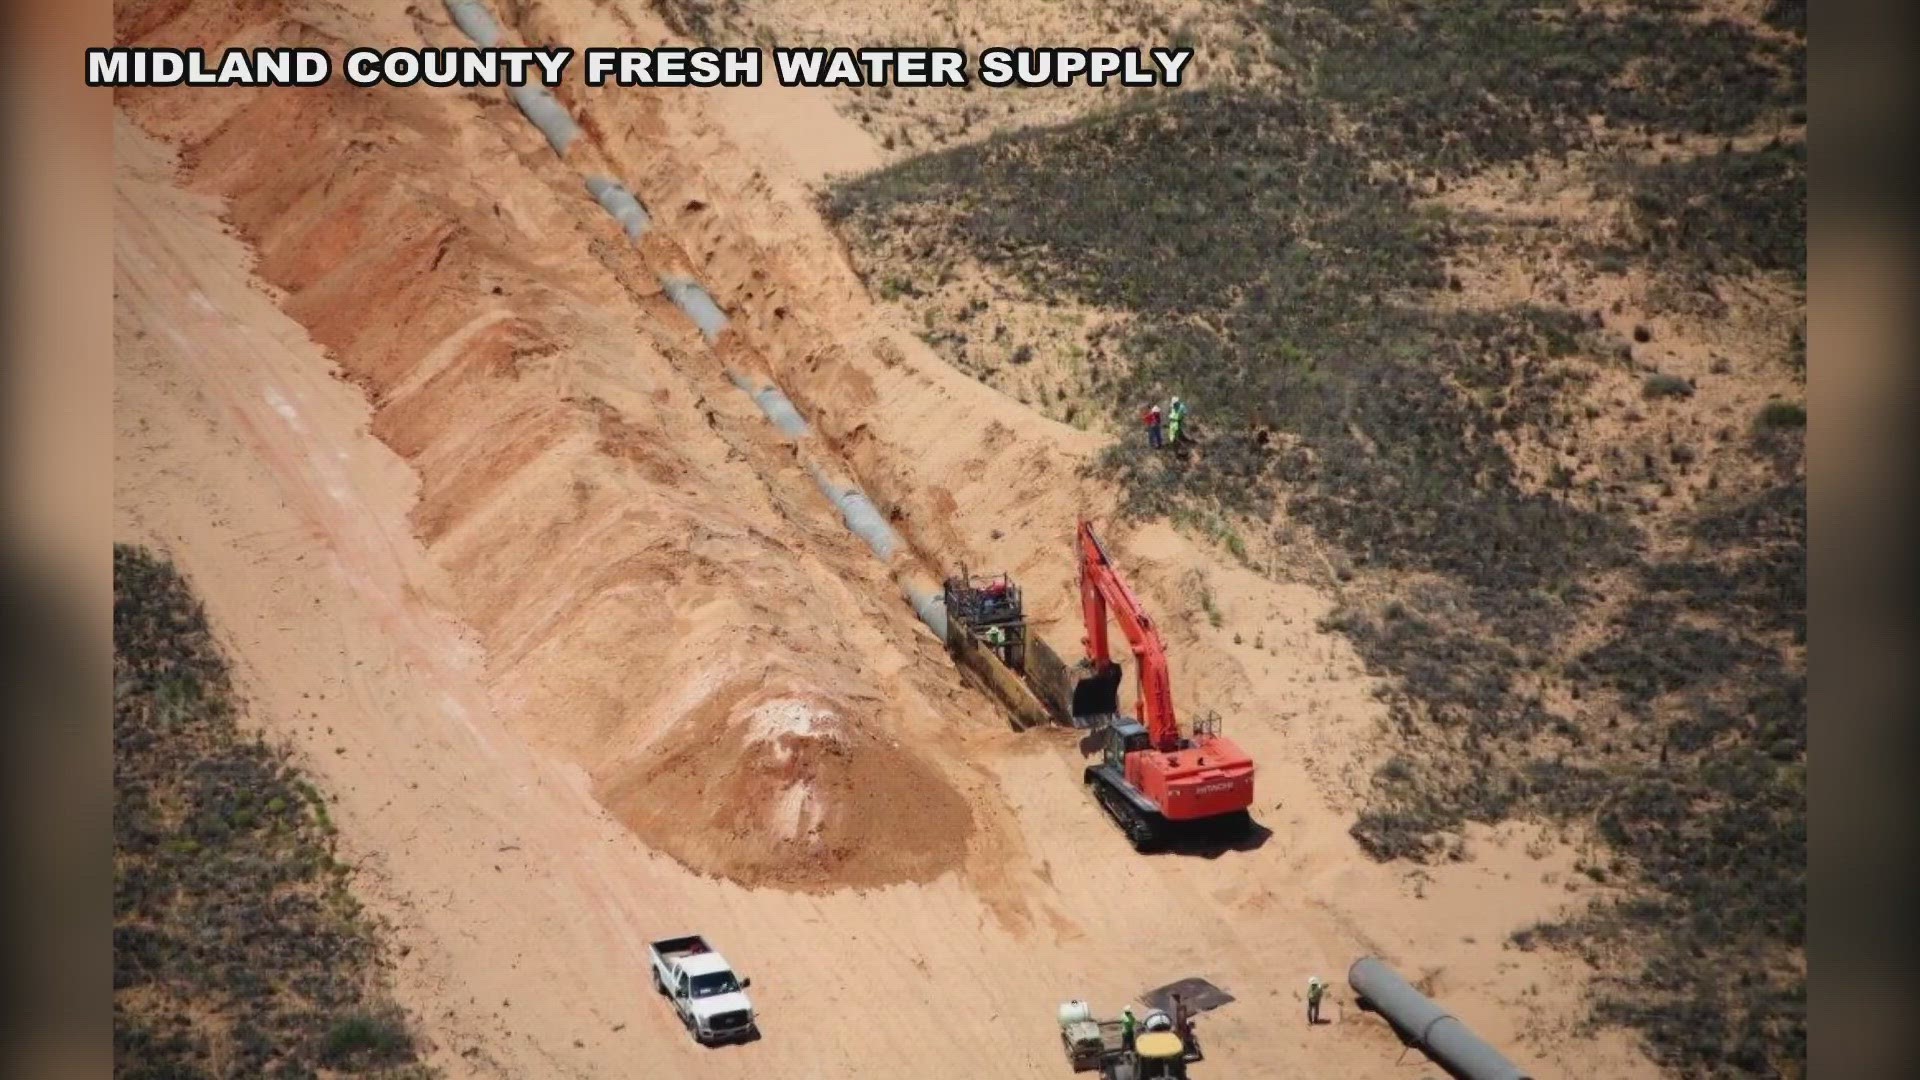 The spill, discovered near T-Bar Ranch, occurred in the late ‘90s to early 2000’s.